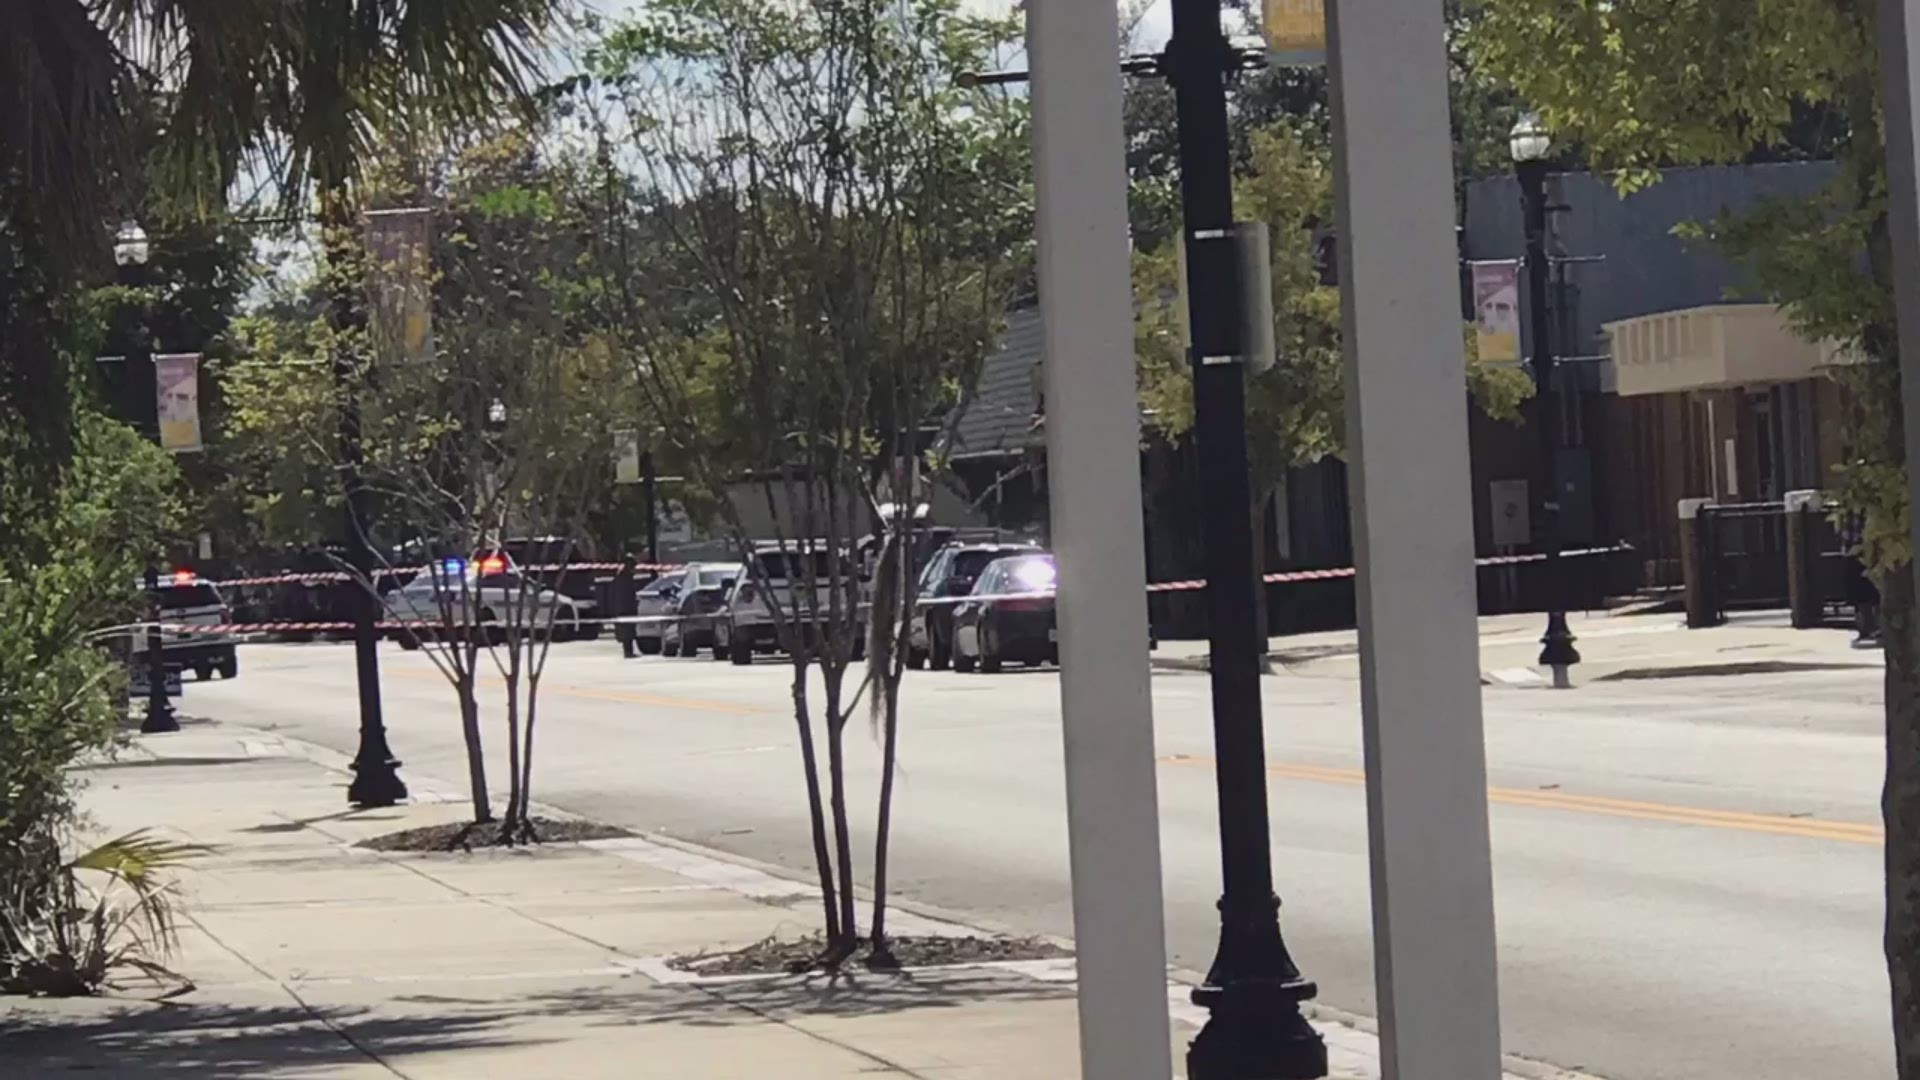 Six people have been shot Sunday, three are in critical condition, just half a mile away from TIAA Bank Field, according to the Jacksonville Sheriff's Office.